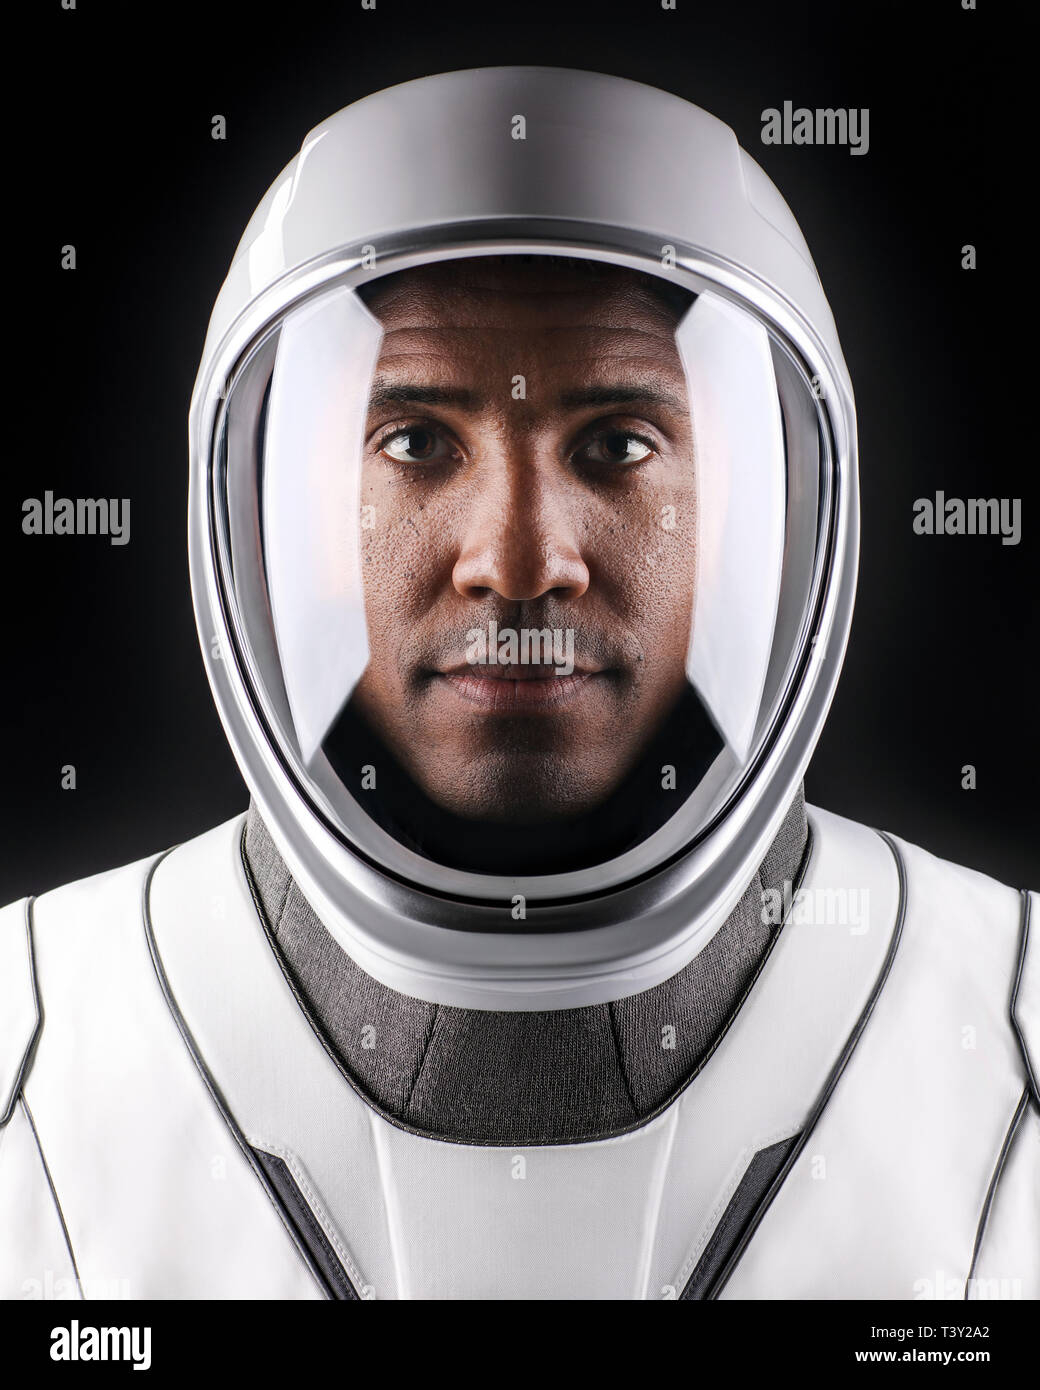 Labeled Space Suit Designer